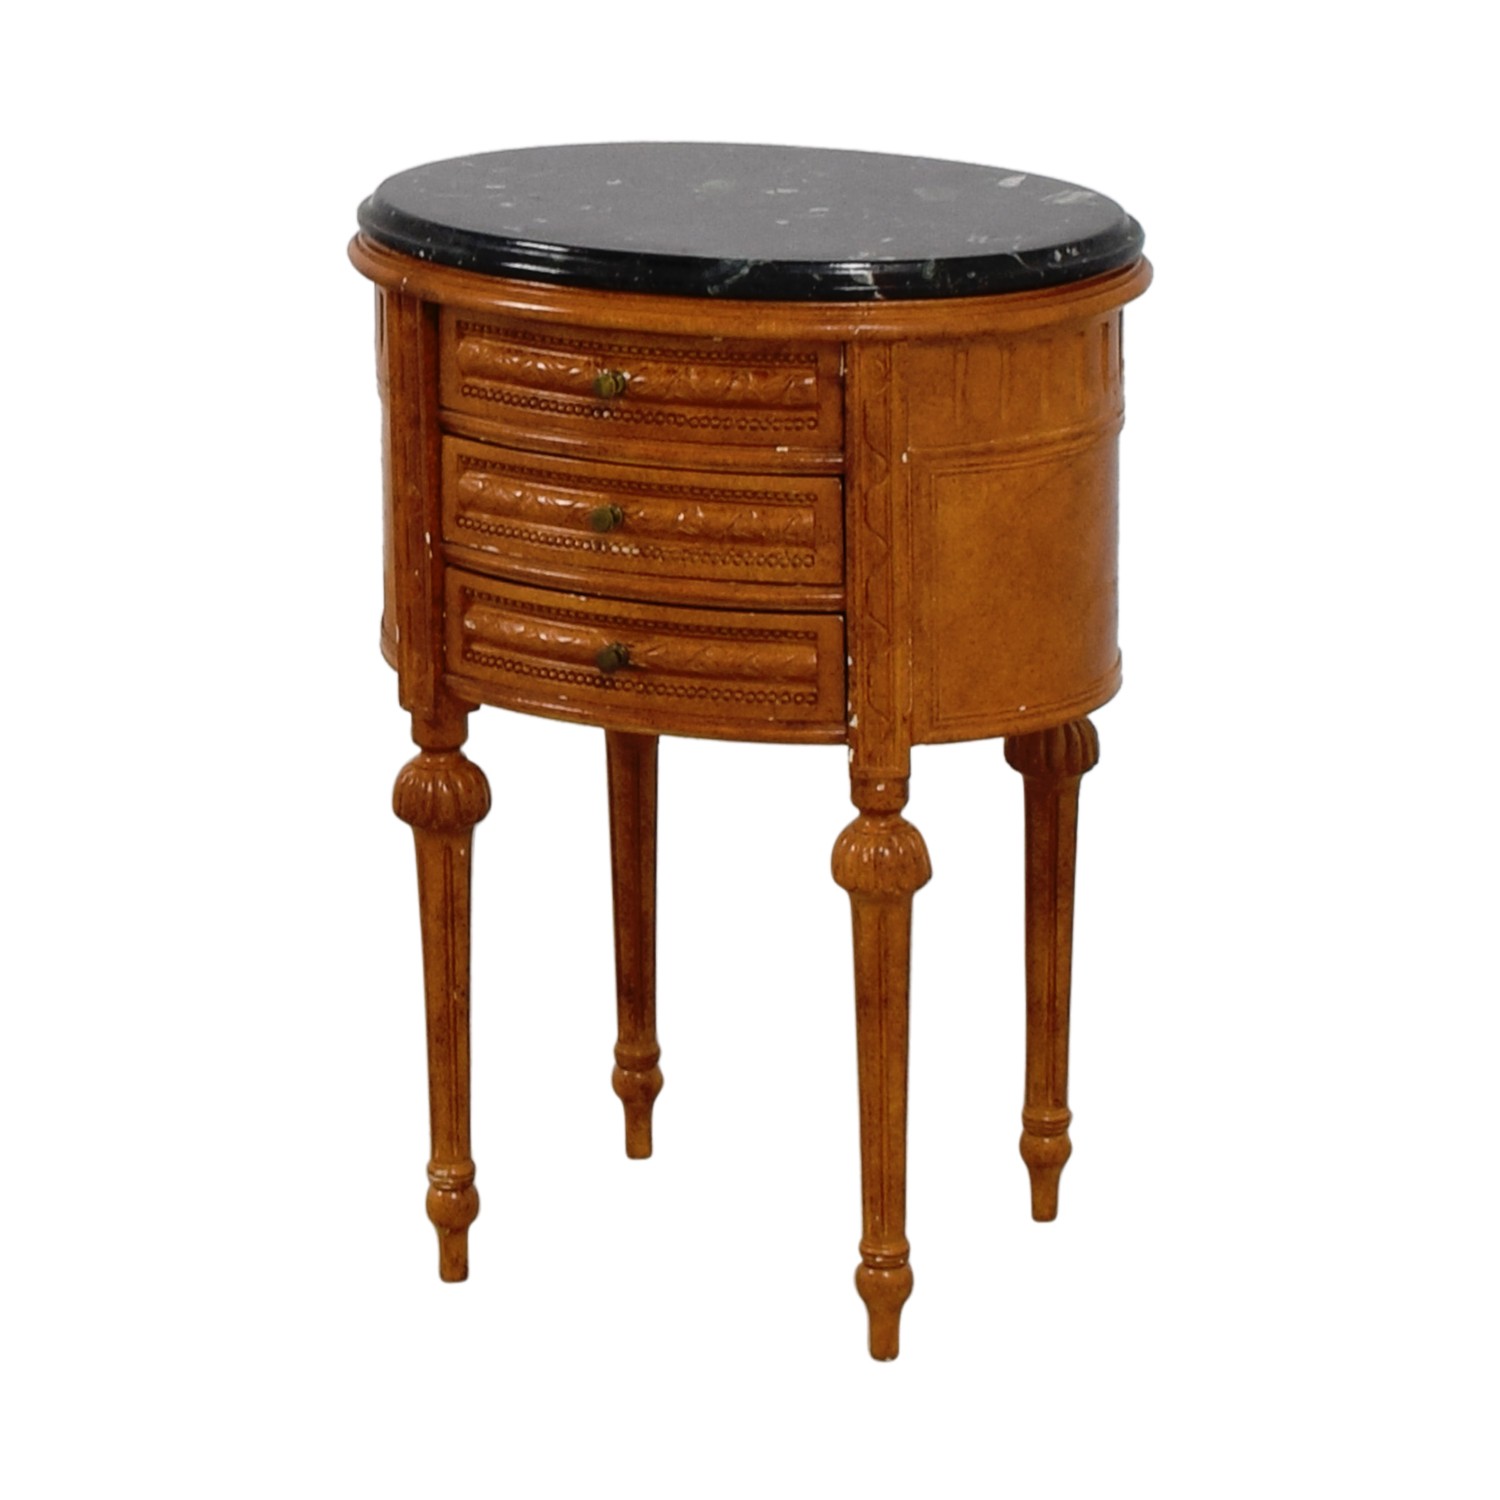 77 off antique oval marble top side table tables